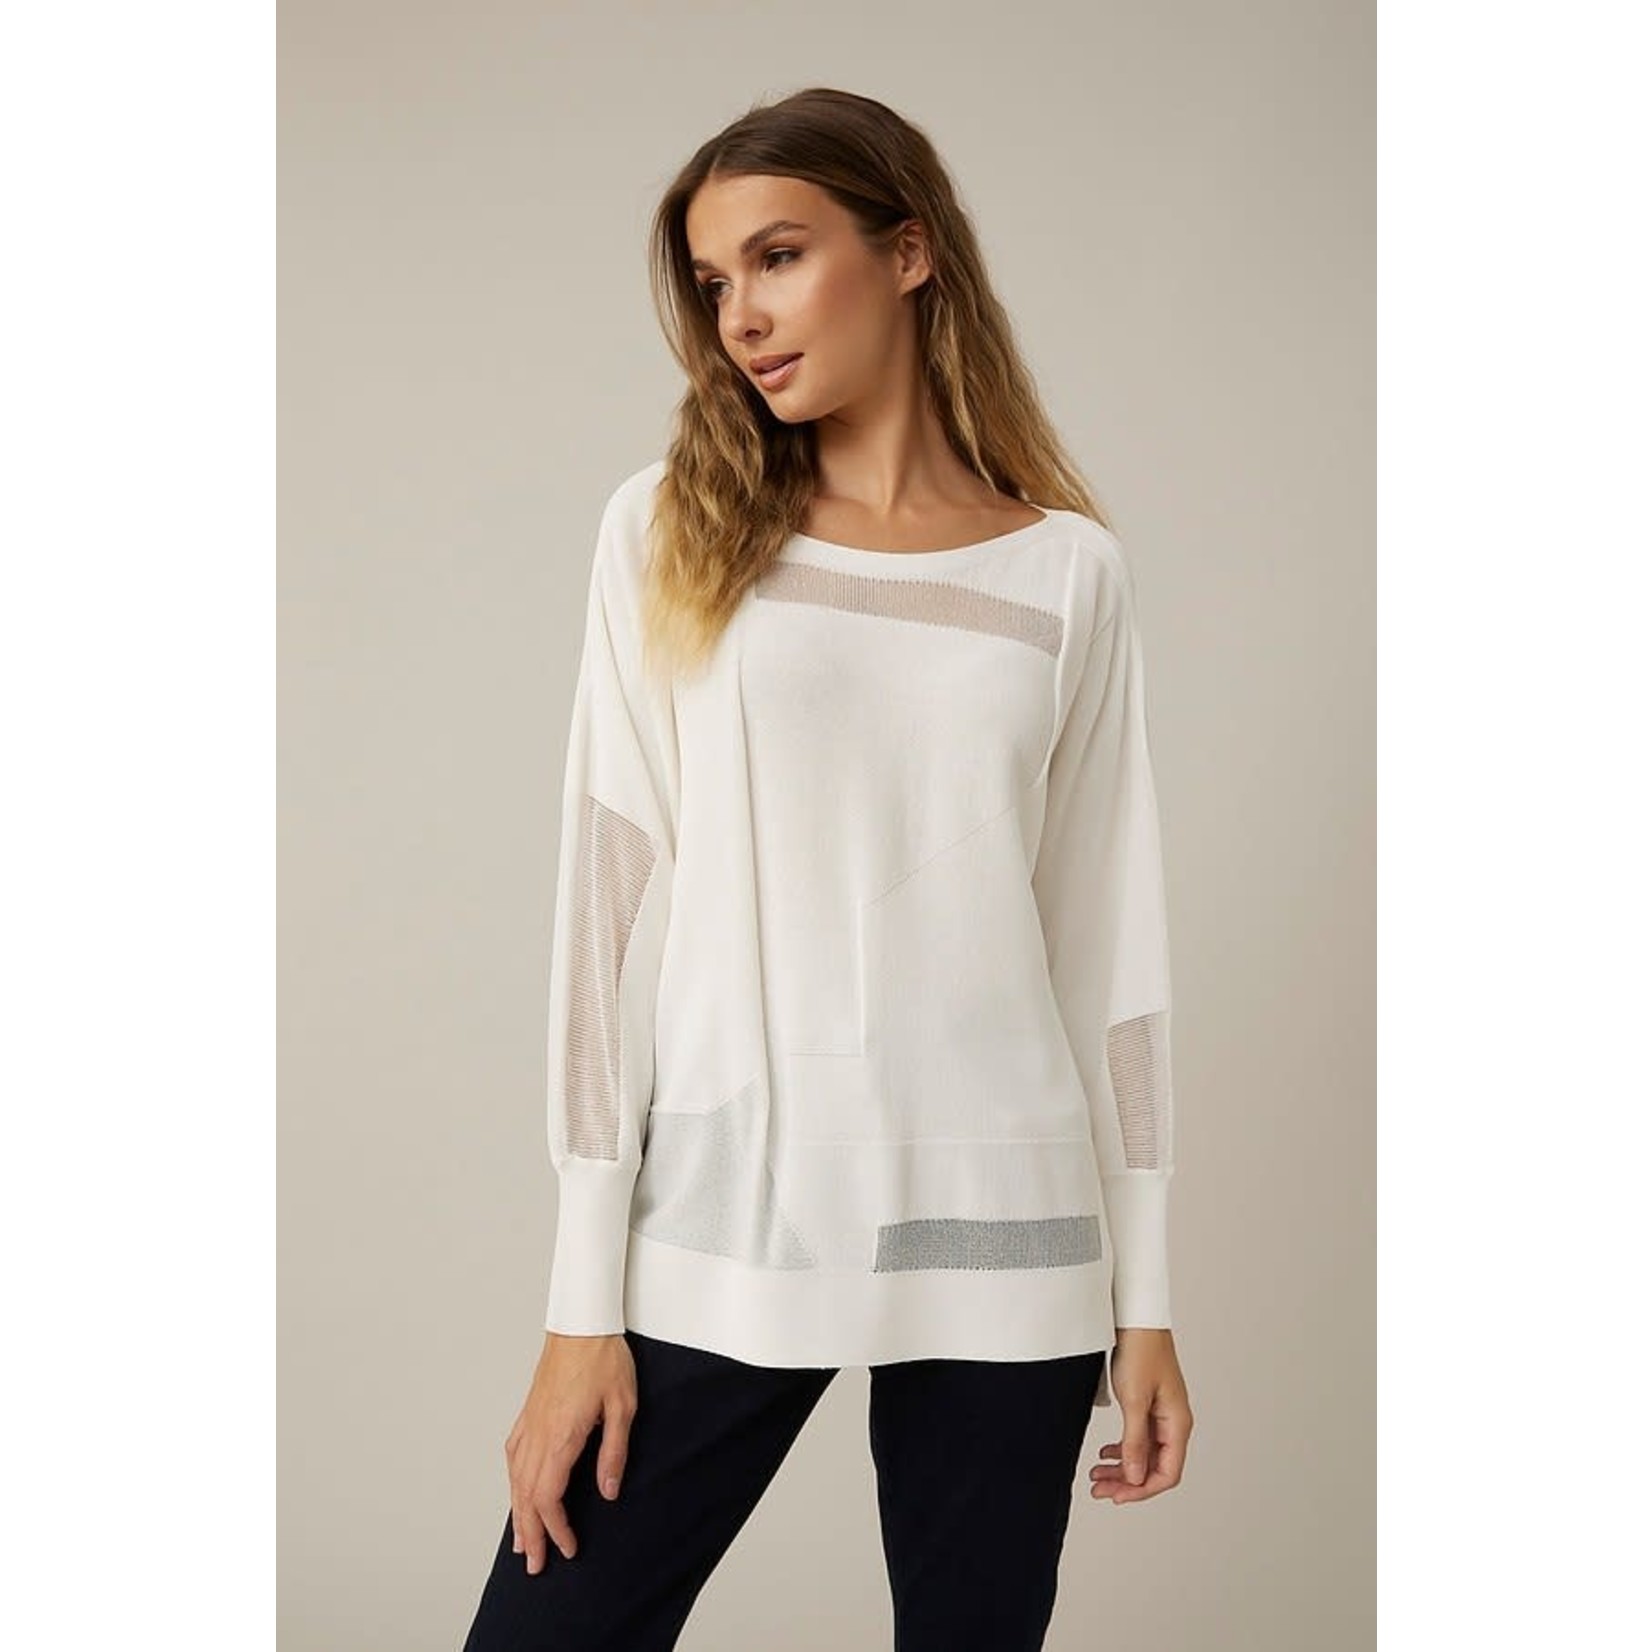 Joseph Ribkoff Cut-out Knit Top Style 221909